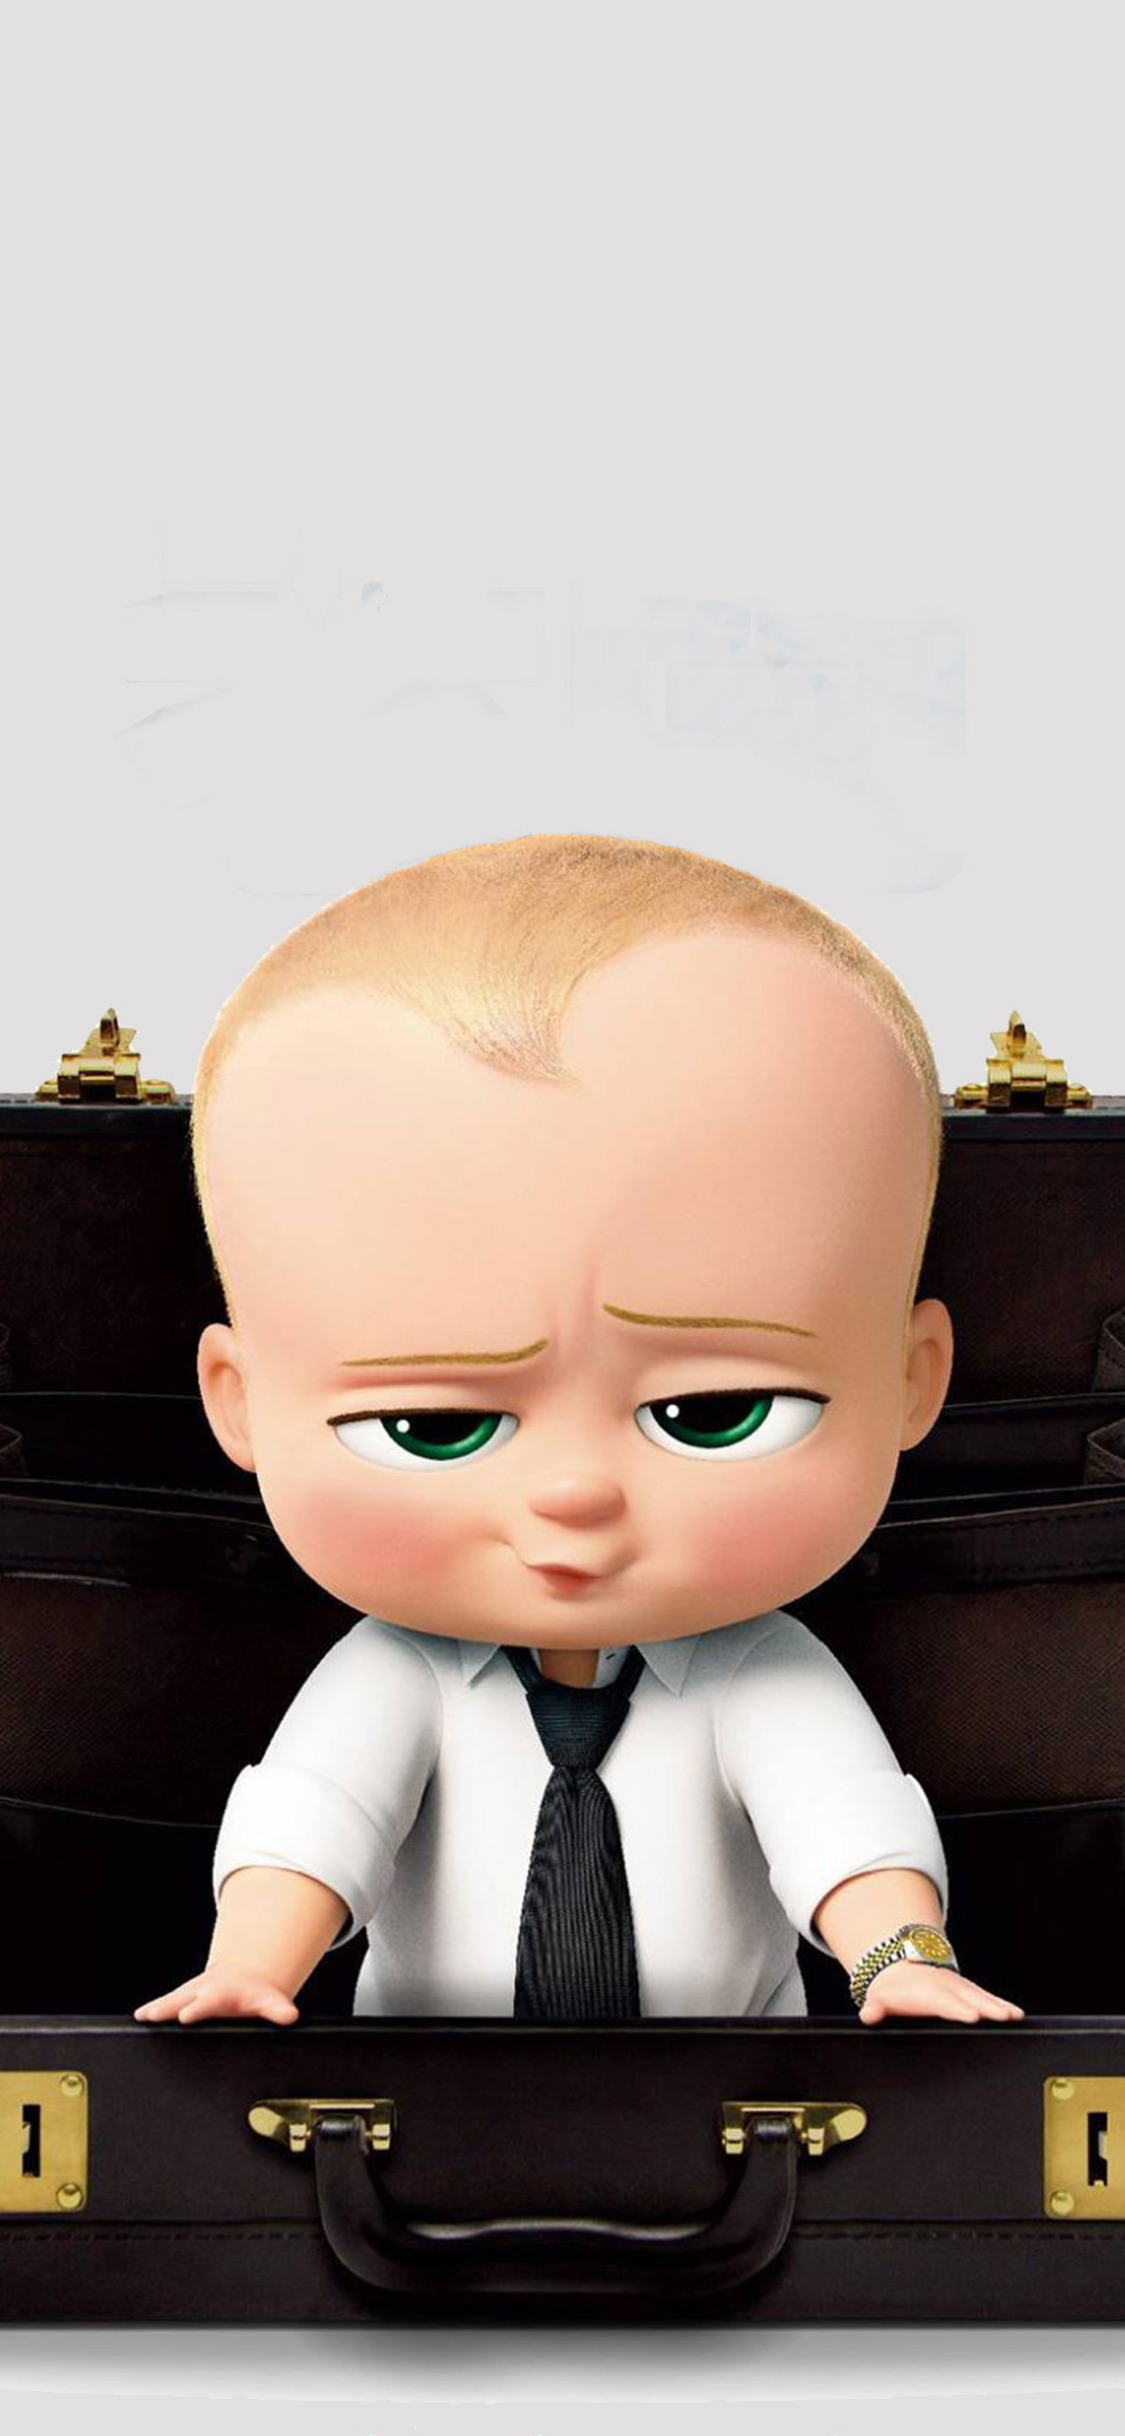 1125x2436 The Boss Baby Animated Movie 2017 Iphone XS,Iphone 10,Iphone X HD  4k Wallpapers, Images, Backgrounds, Photos and Pictures